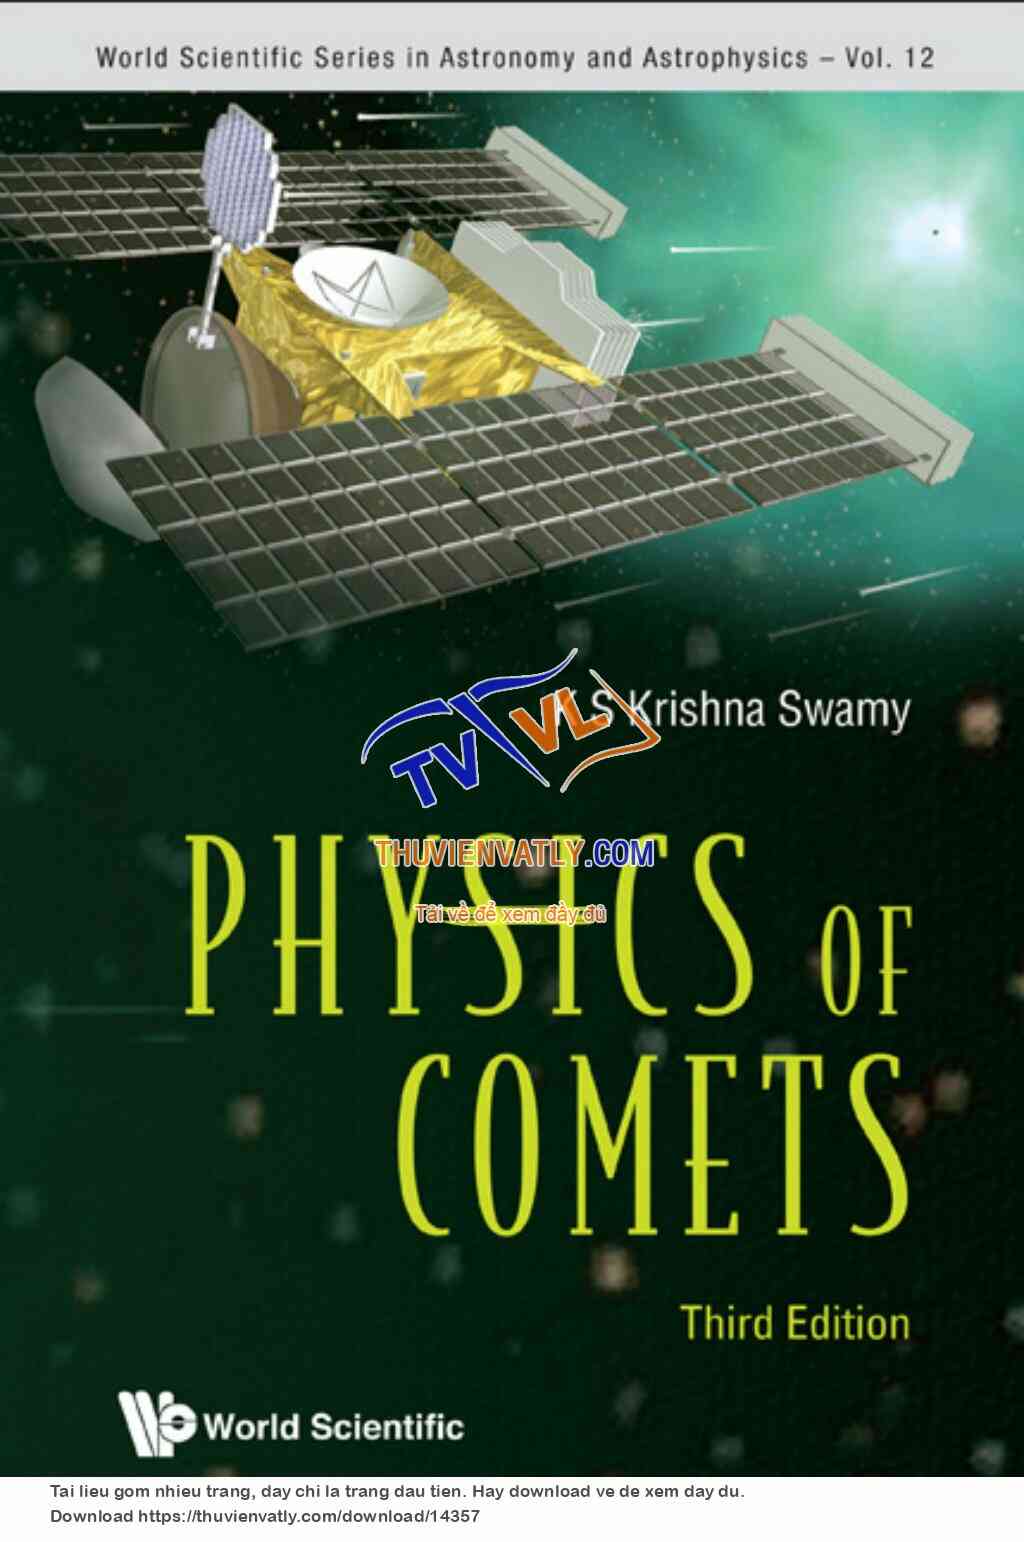 Physics of Comets 3rd ed. - K. Swamy (World, 2010)